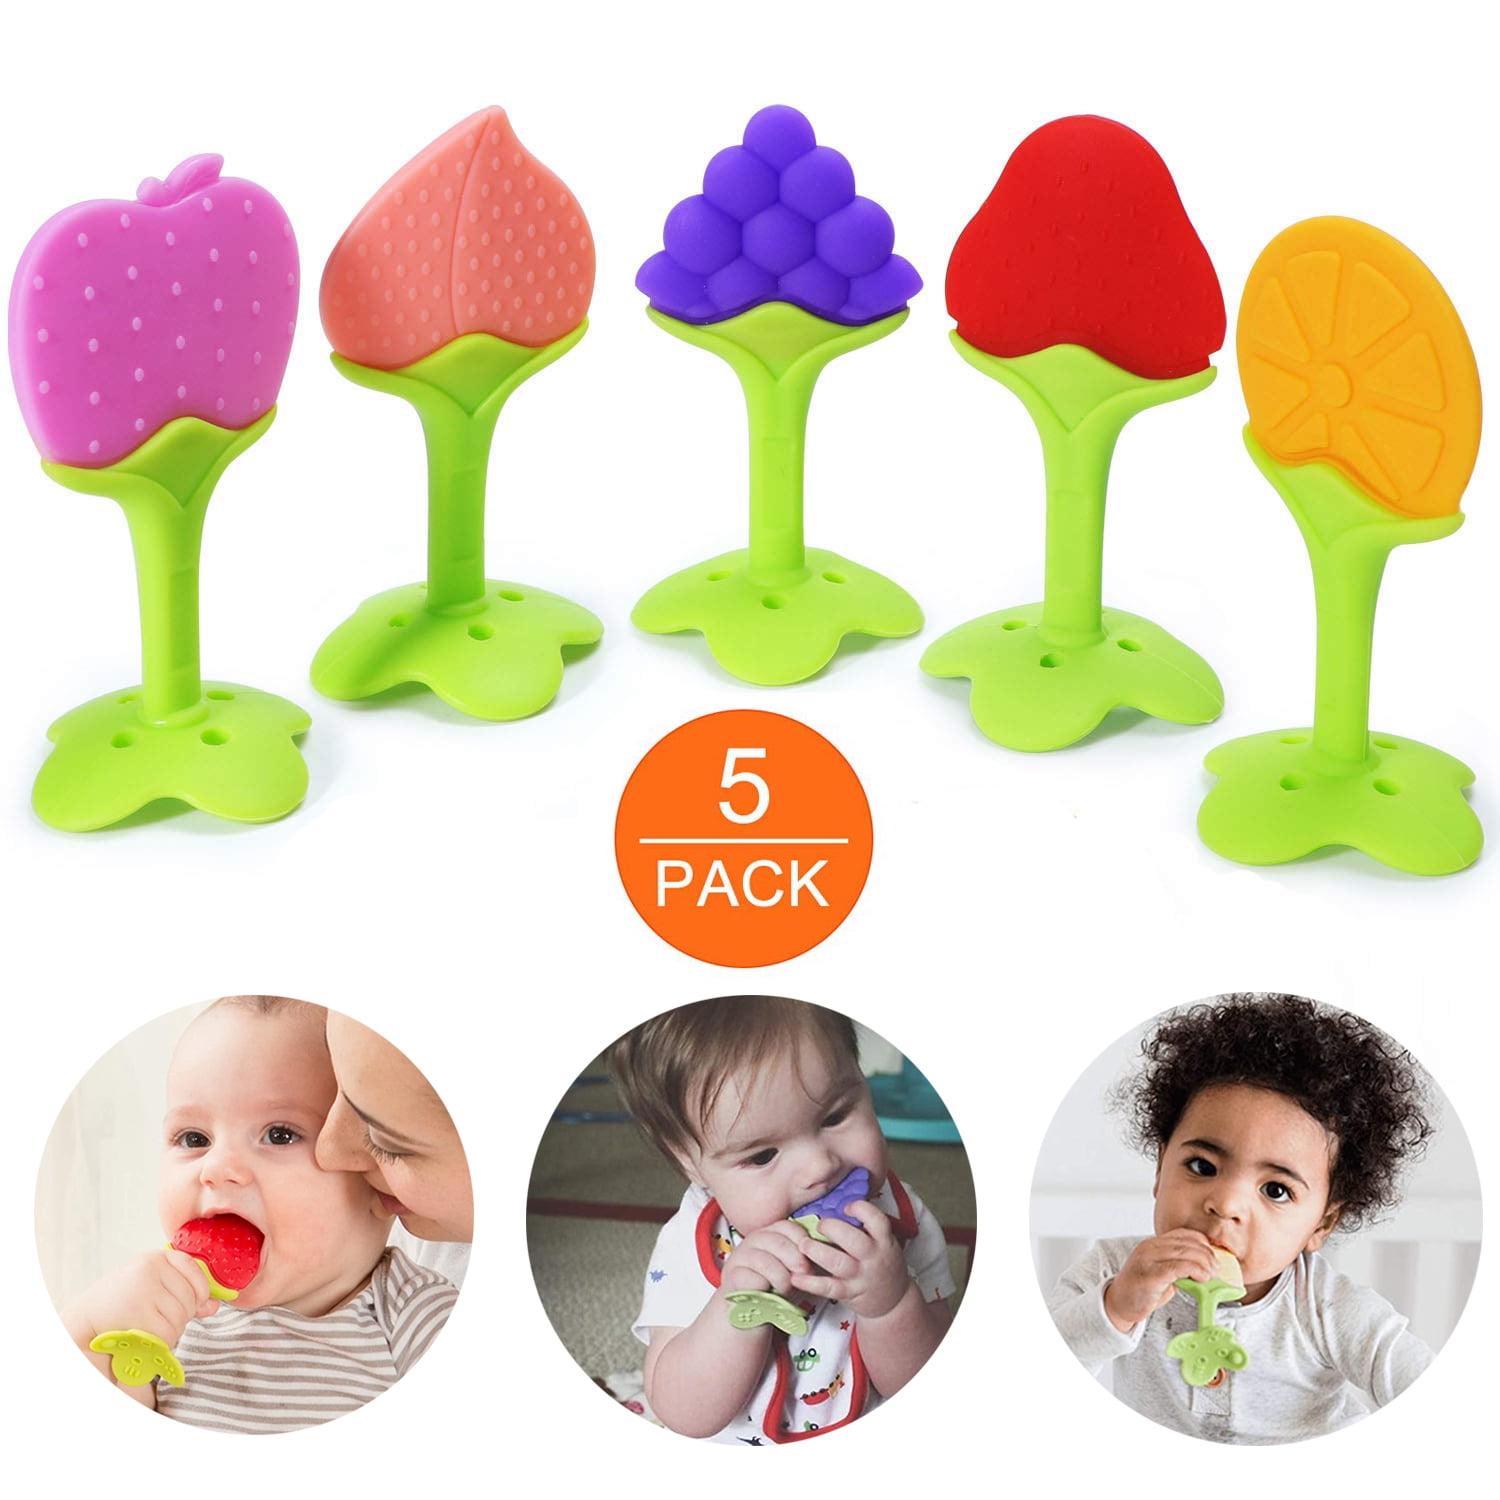 Green + Pink Children Infant Newborn Baby Rattle Toy Set Musical Toys Bendy Ball Little Boys Girls Teether Ball Music and Flashing Lights Shake and Roll Ball Gym Balls for 3-18 Months Toddler 